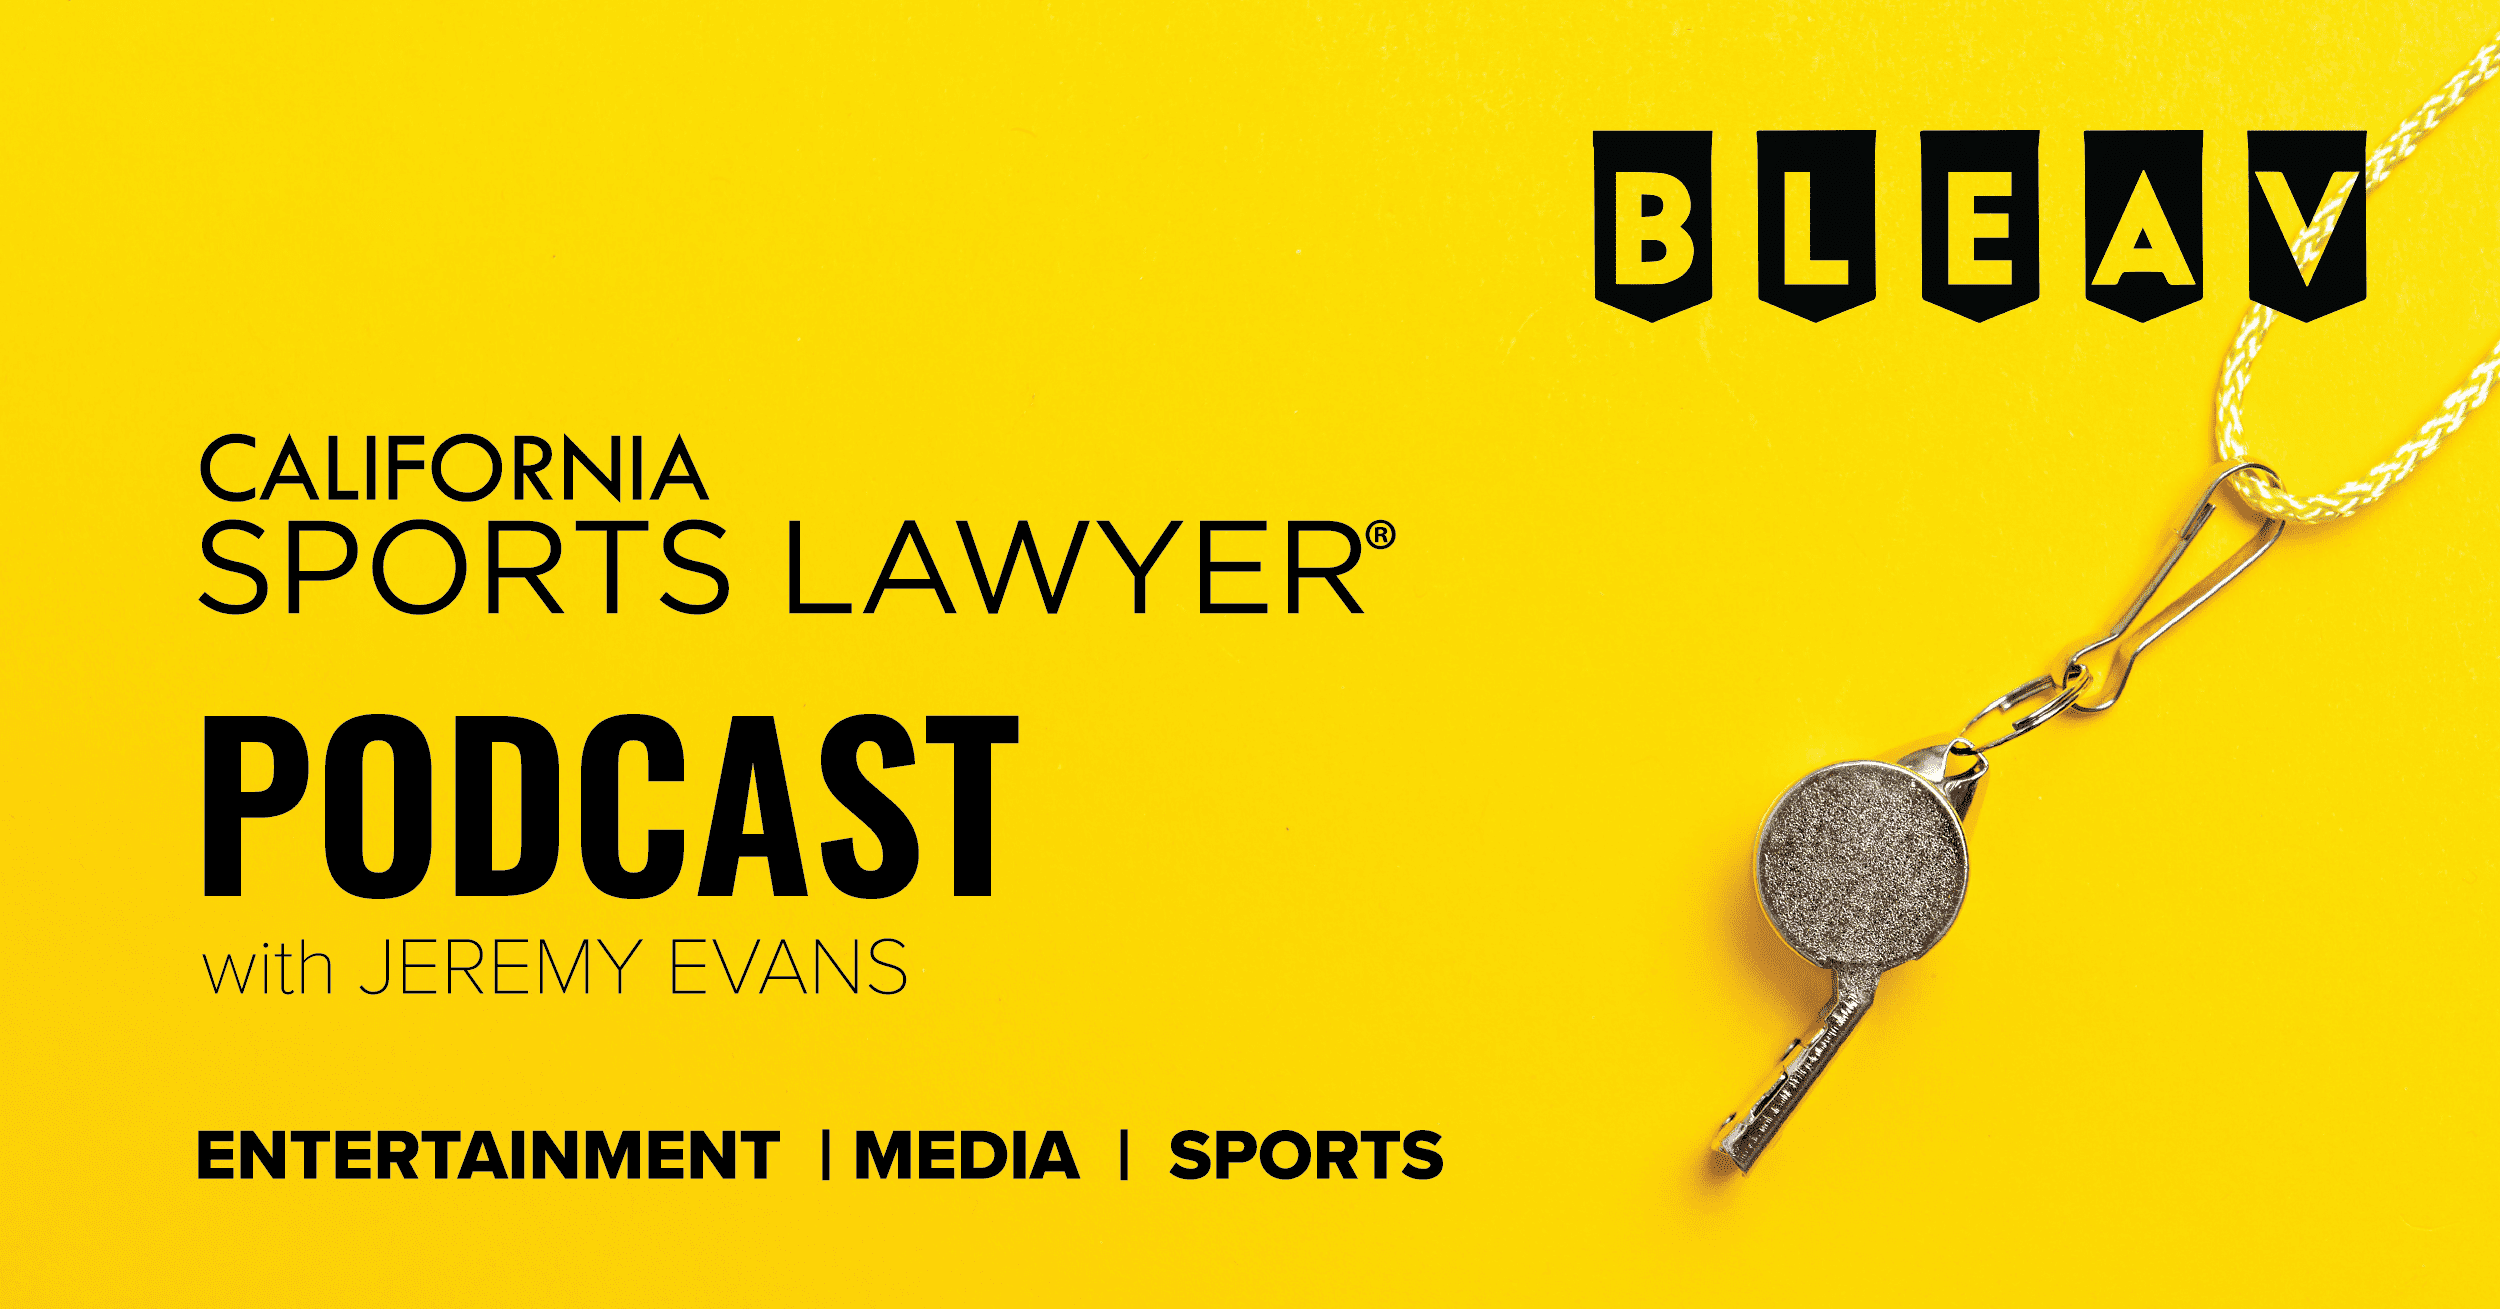 California Sports Lawyer® Podcast with Jeremy Evans: Is ChatGPT the Newer Version of Google Search?